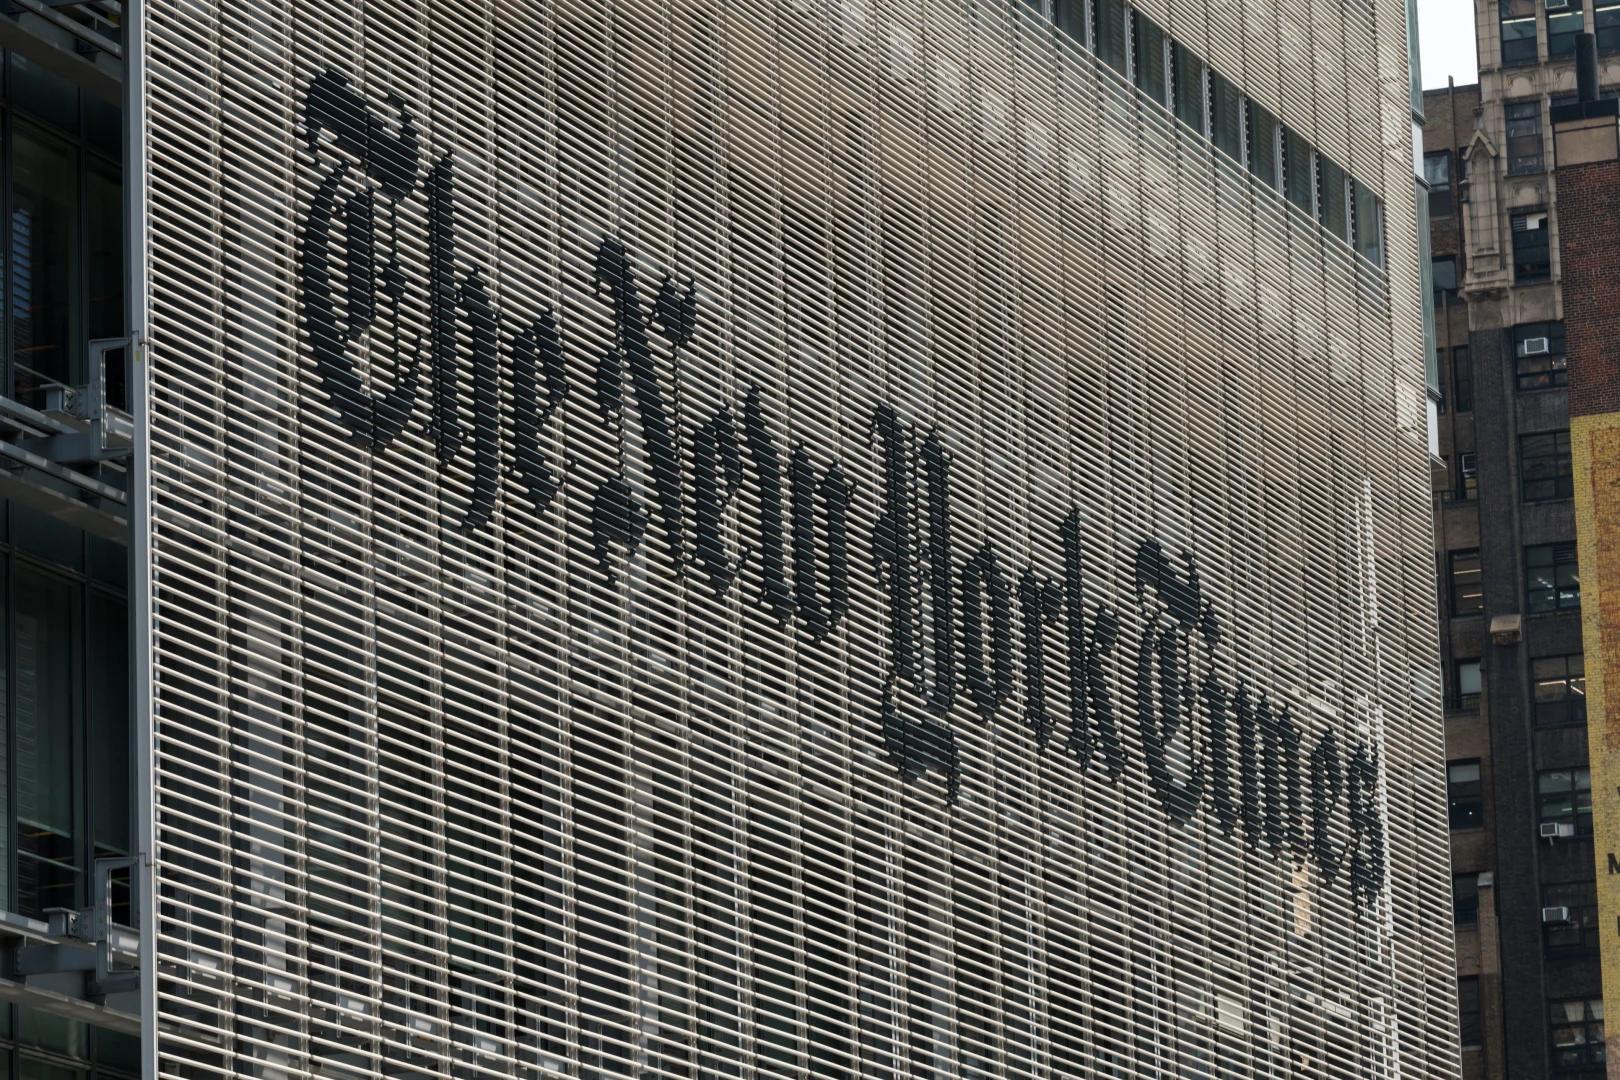 New York Times issues correction on COVID-19 child deaths